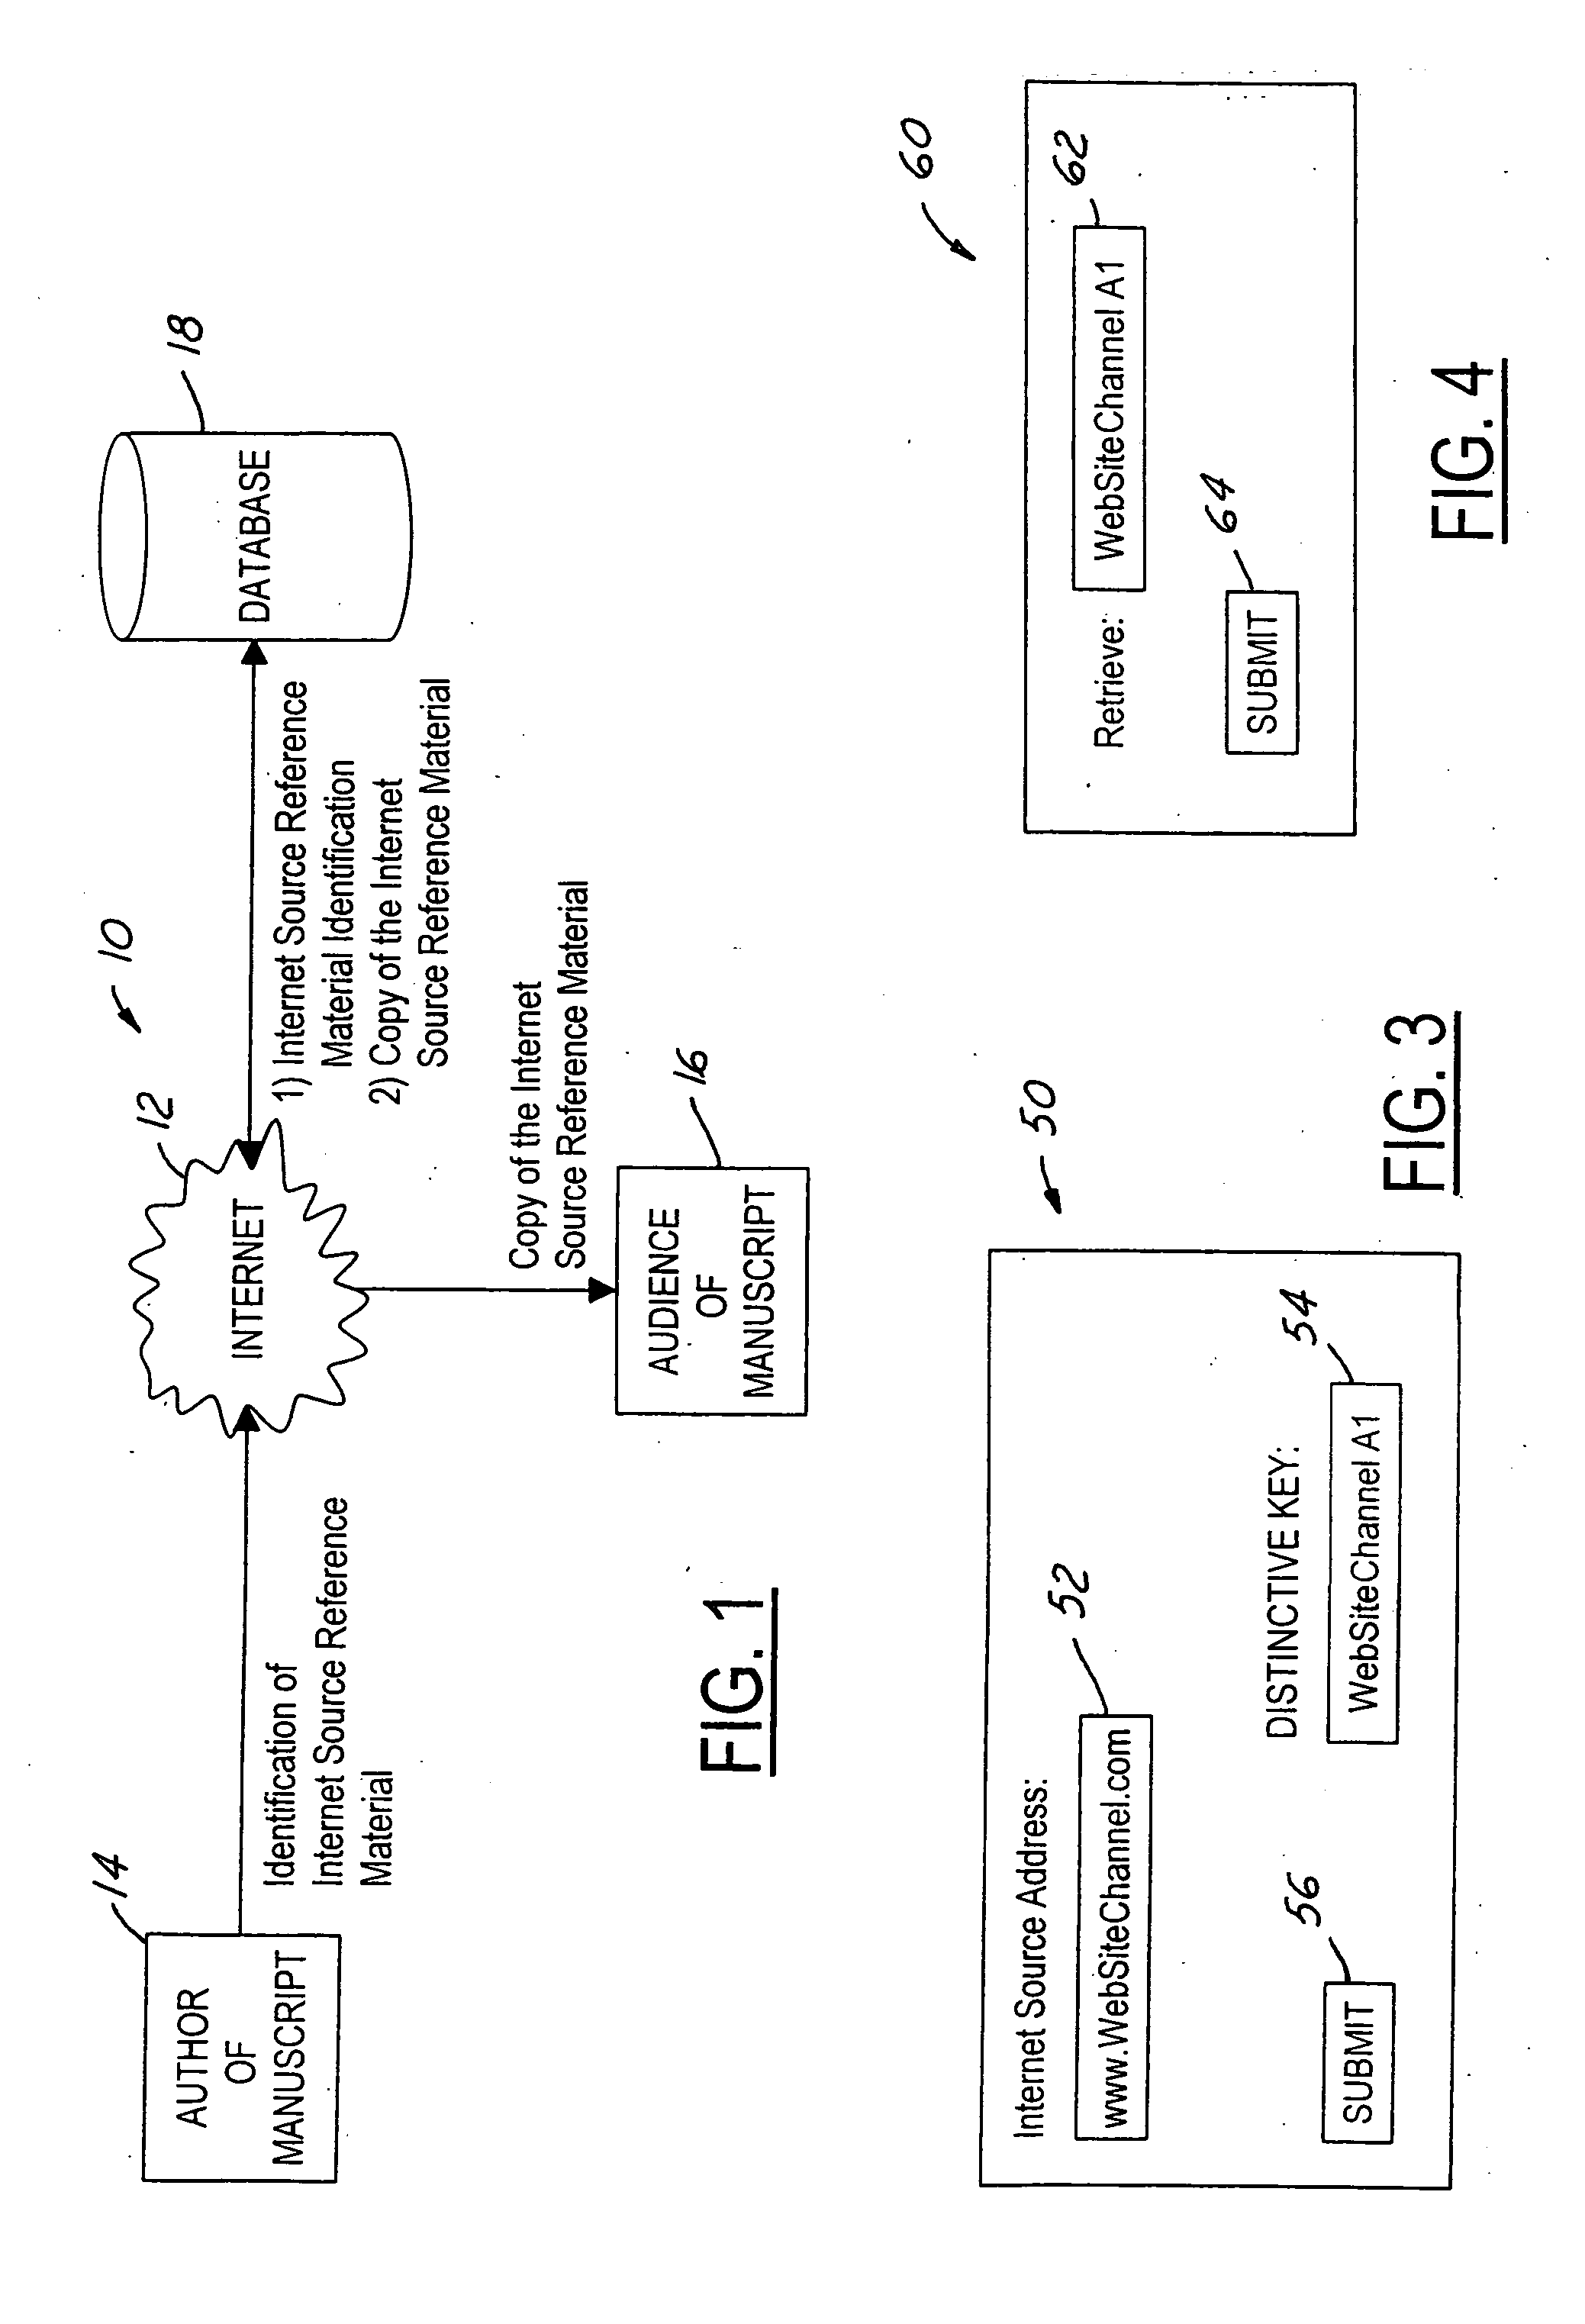 Method and system for archiving and retrieving bibliography information and reference material